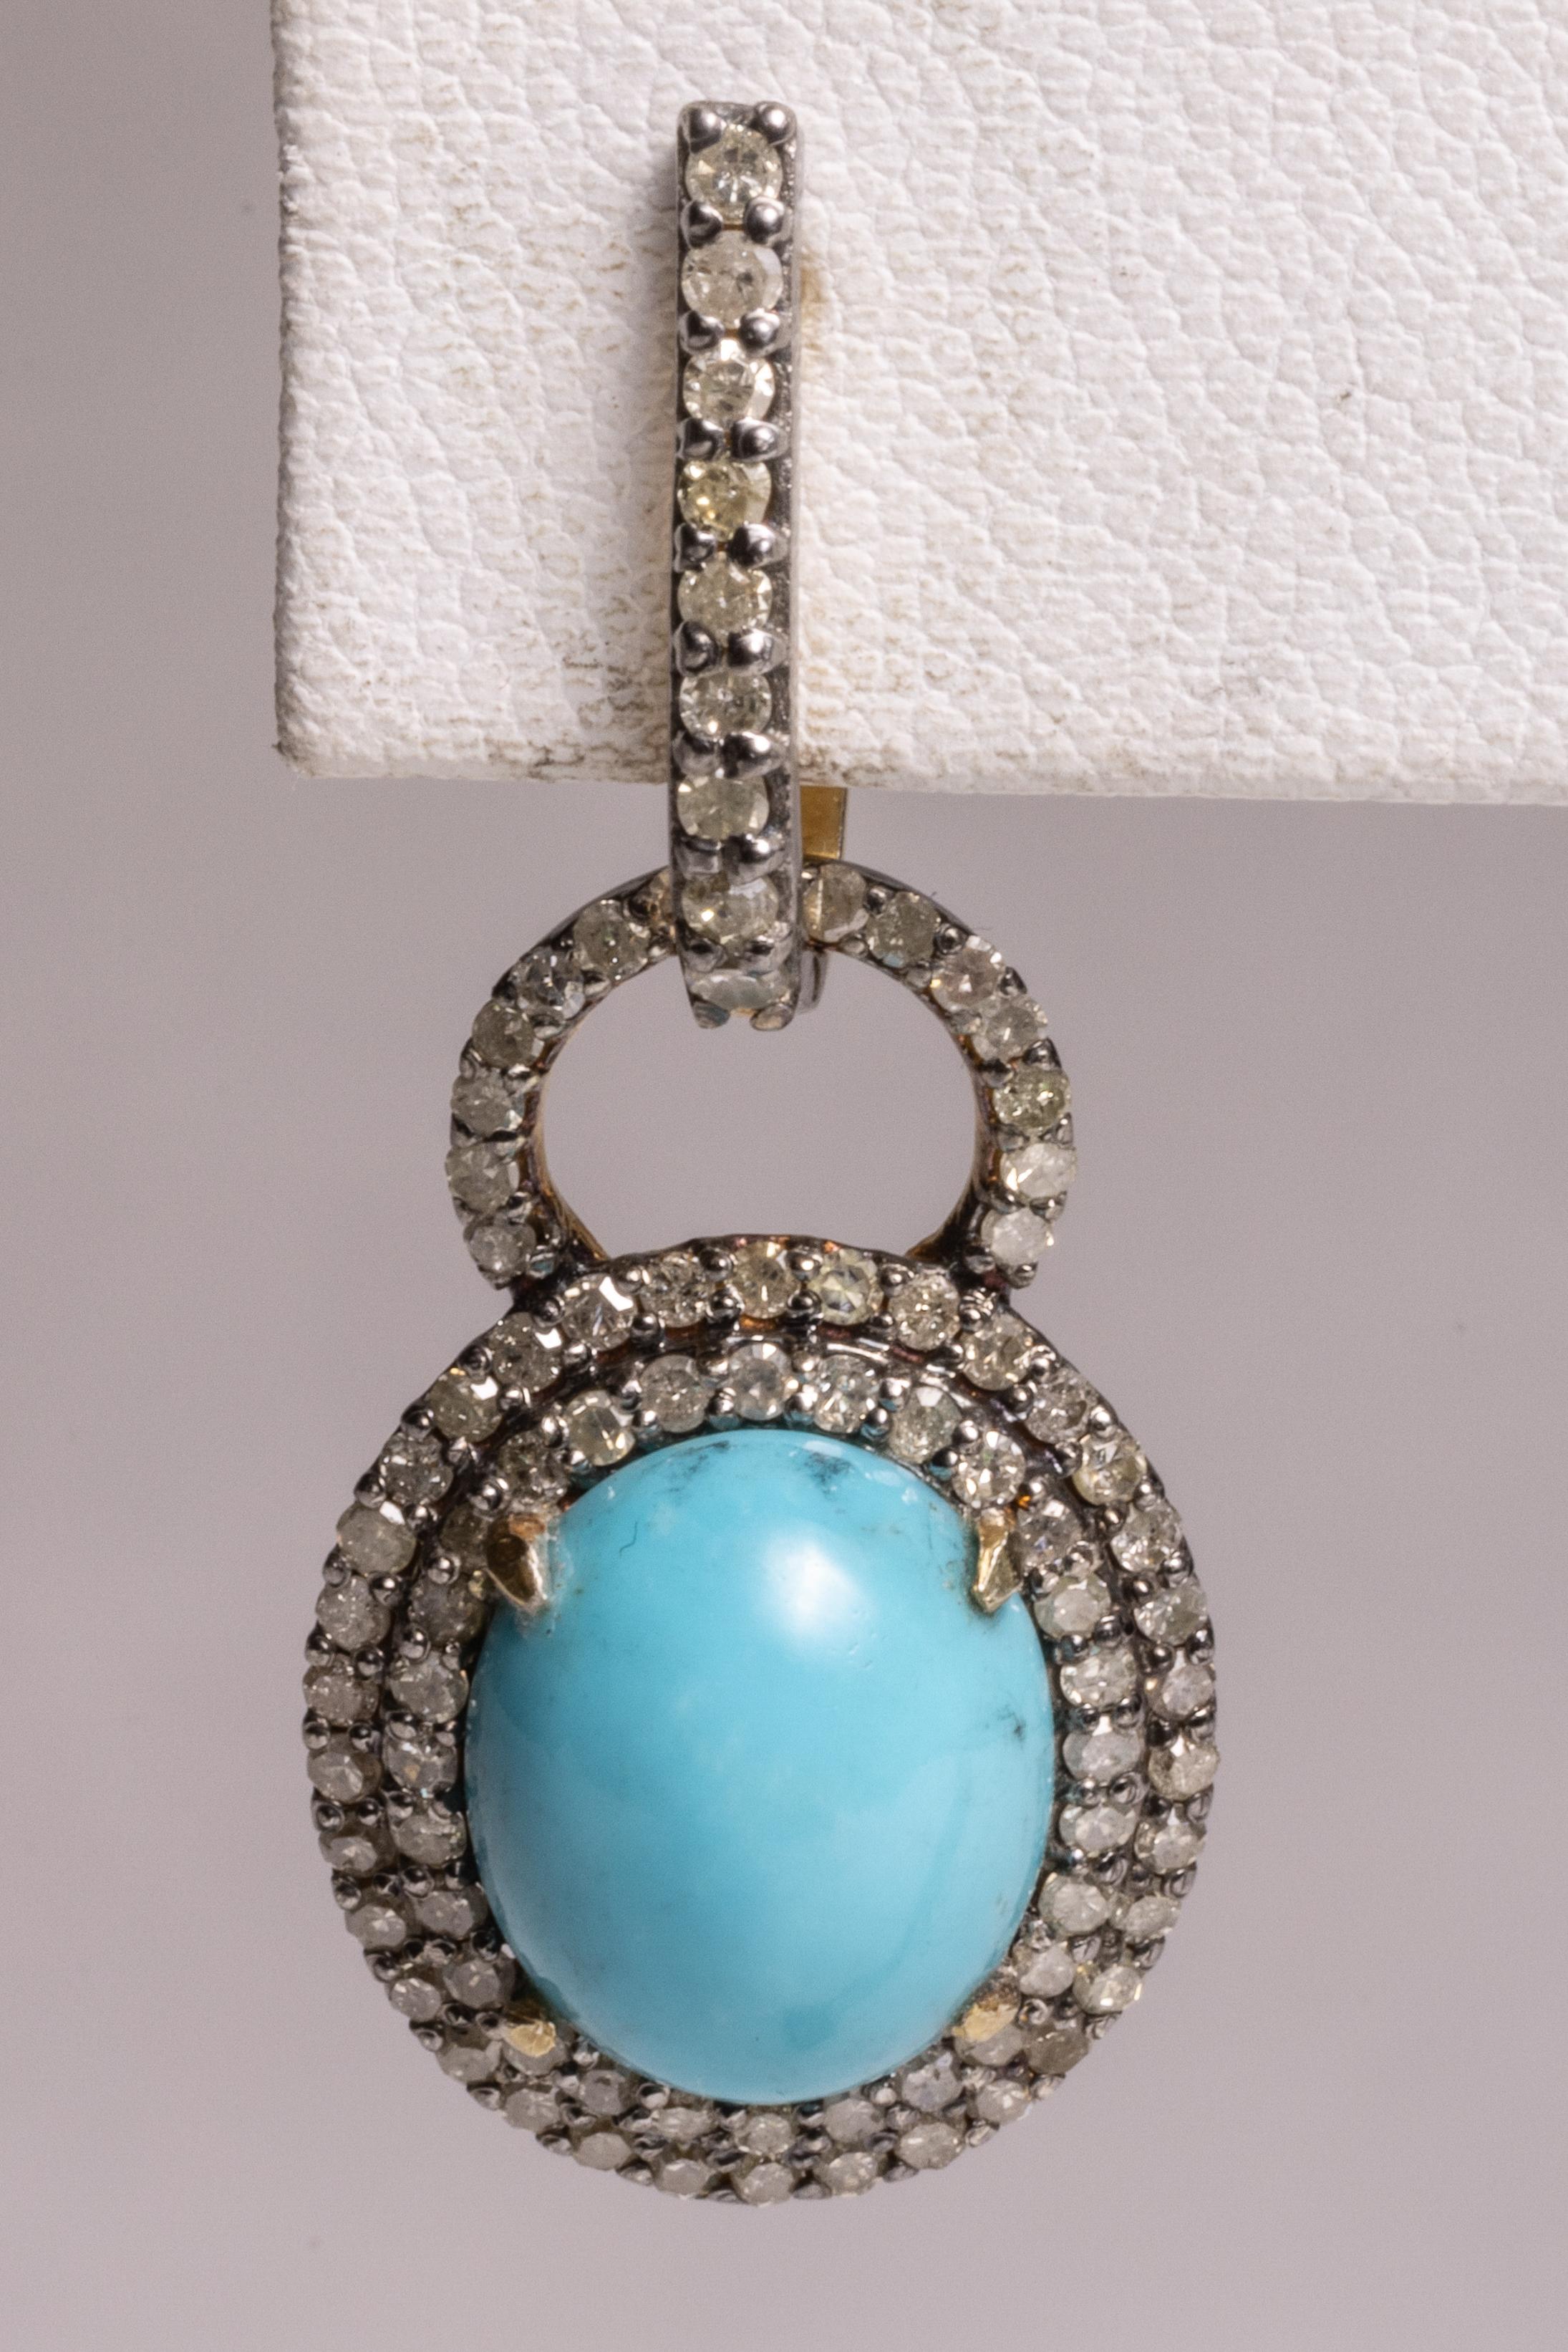 Highly desirable Sleeping Beauty turquoise in an oval cabochon cut.  Bordered with a double row of round, brilliant cut diamonds in a pave` setting.  French clip backs for pierced ears.  Diamonds total 1.60 carats and Turquoise is 5.59 carats.  Set